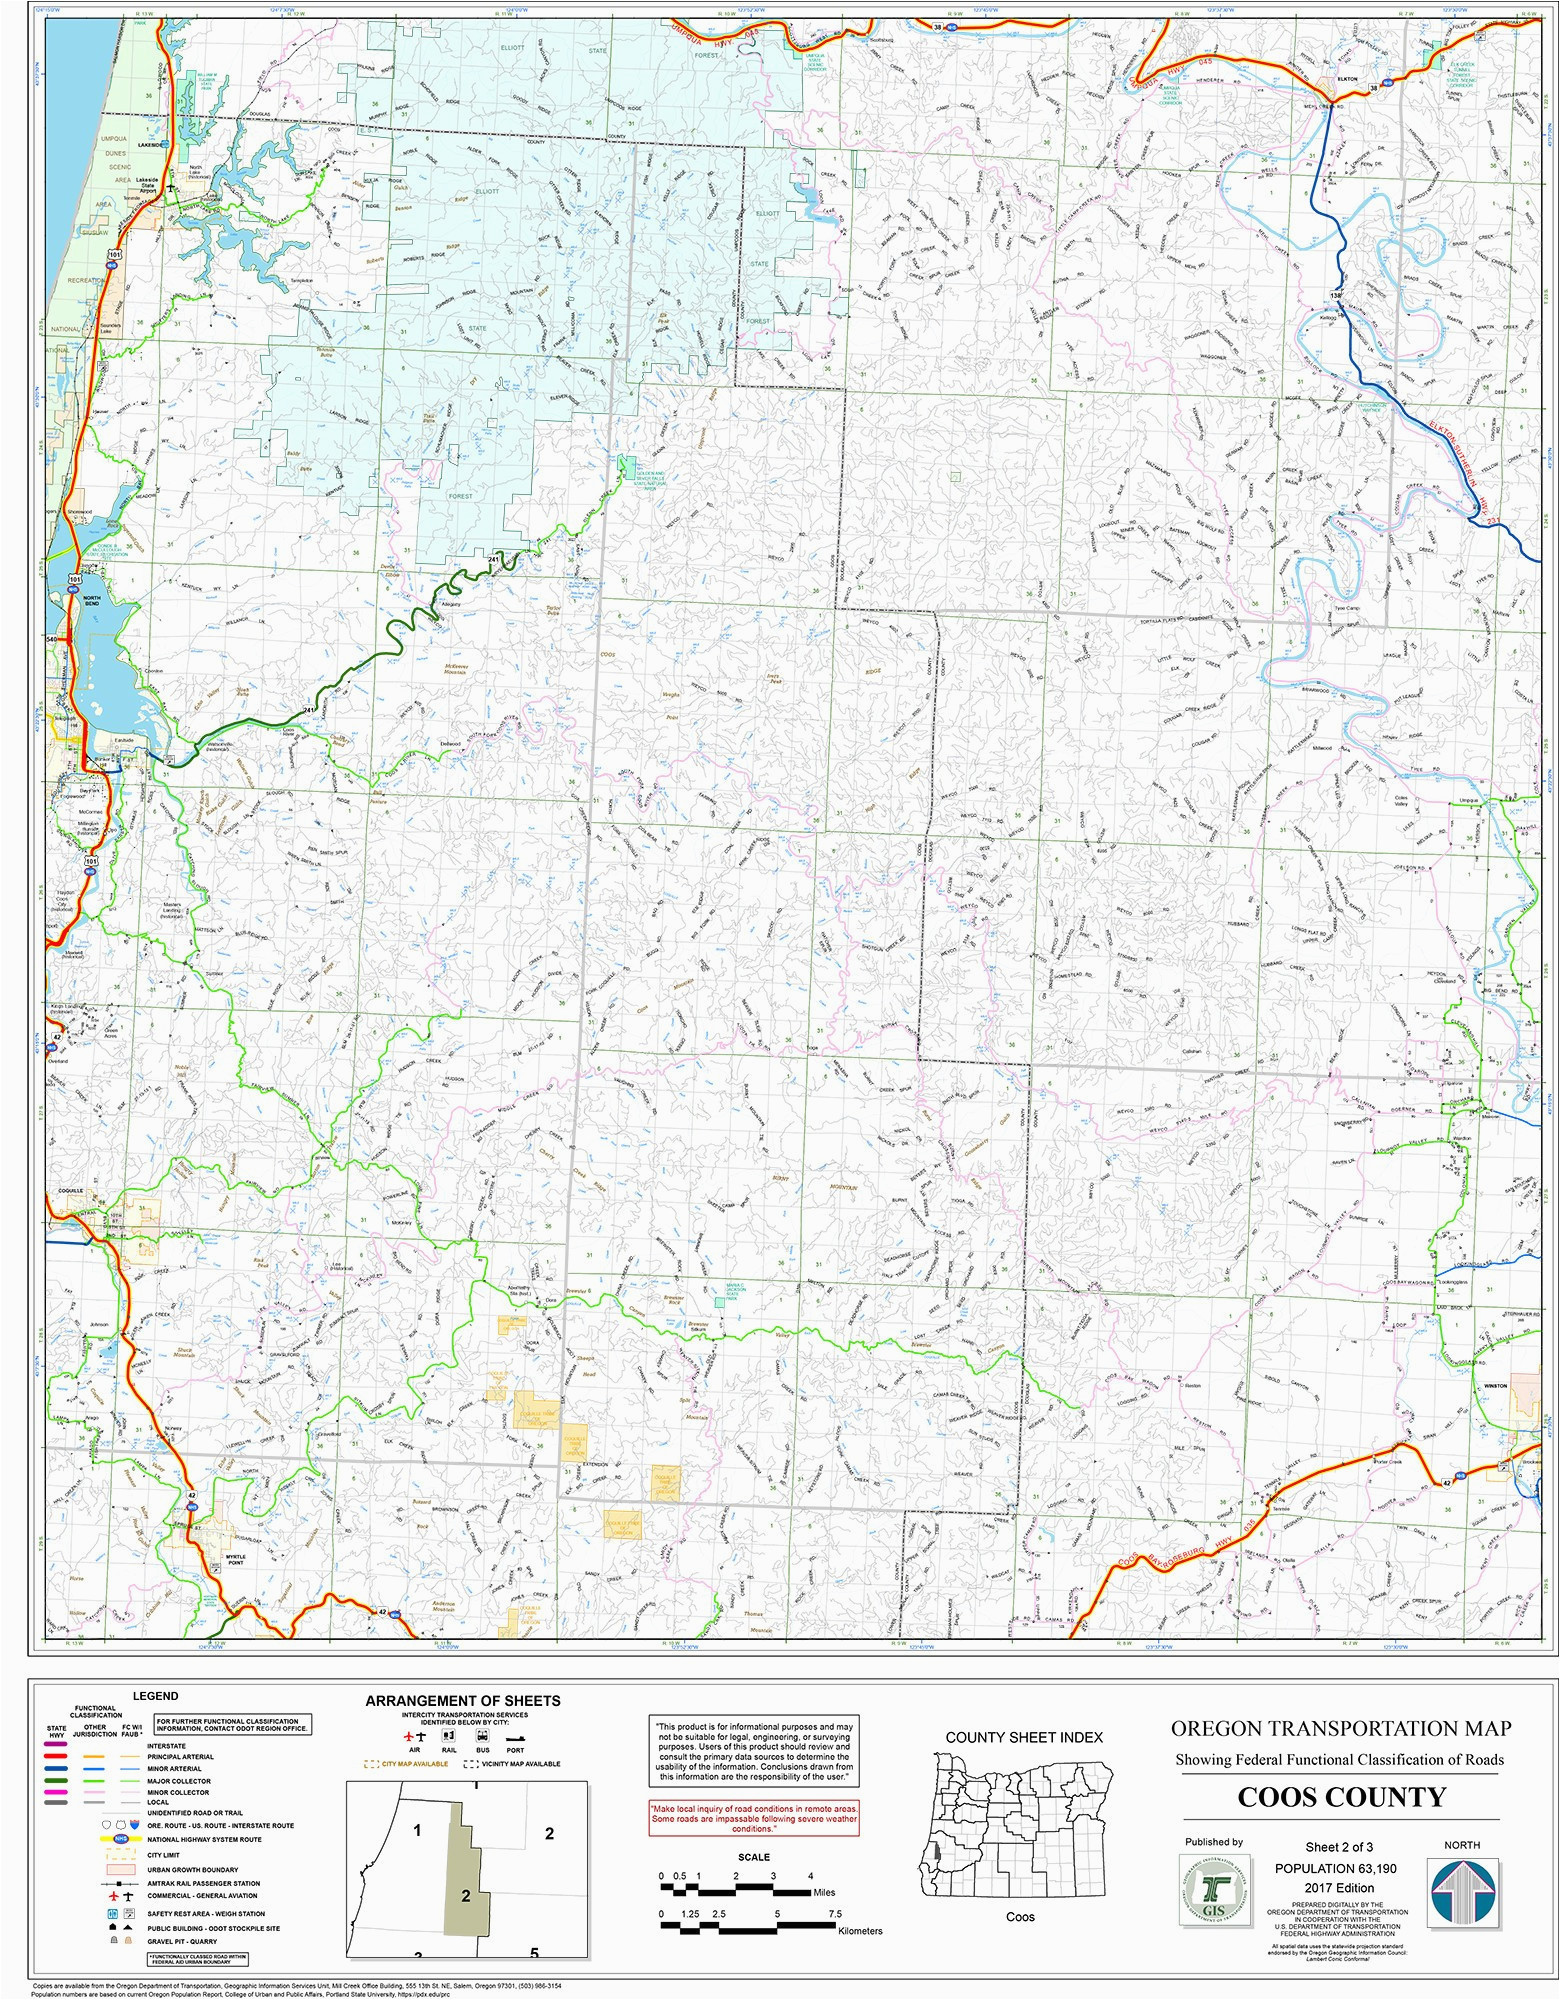 Topographical Map Of Tennessee Google Maps topography Maps Driving Directions